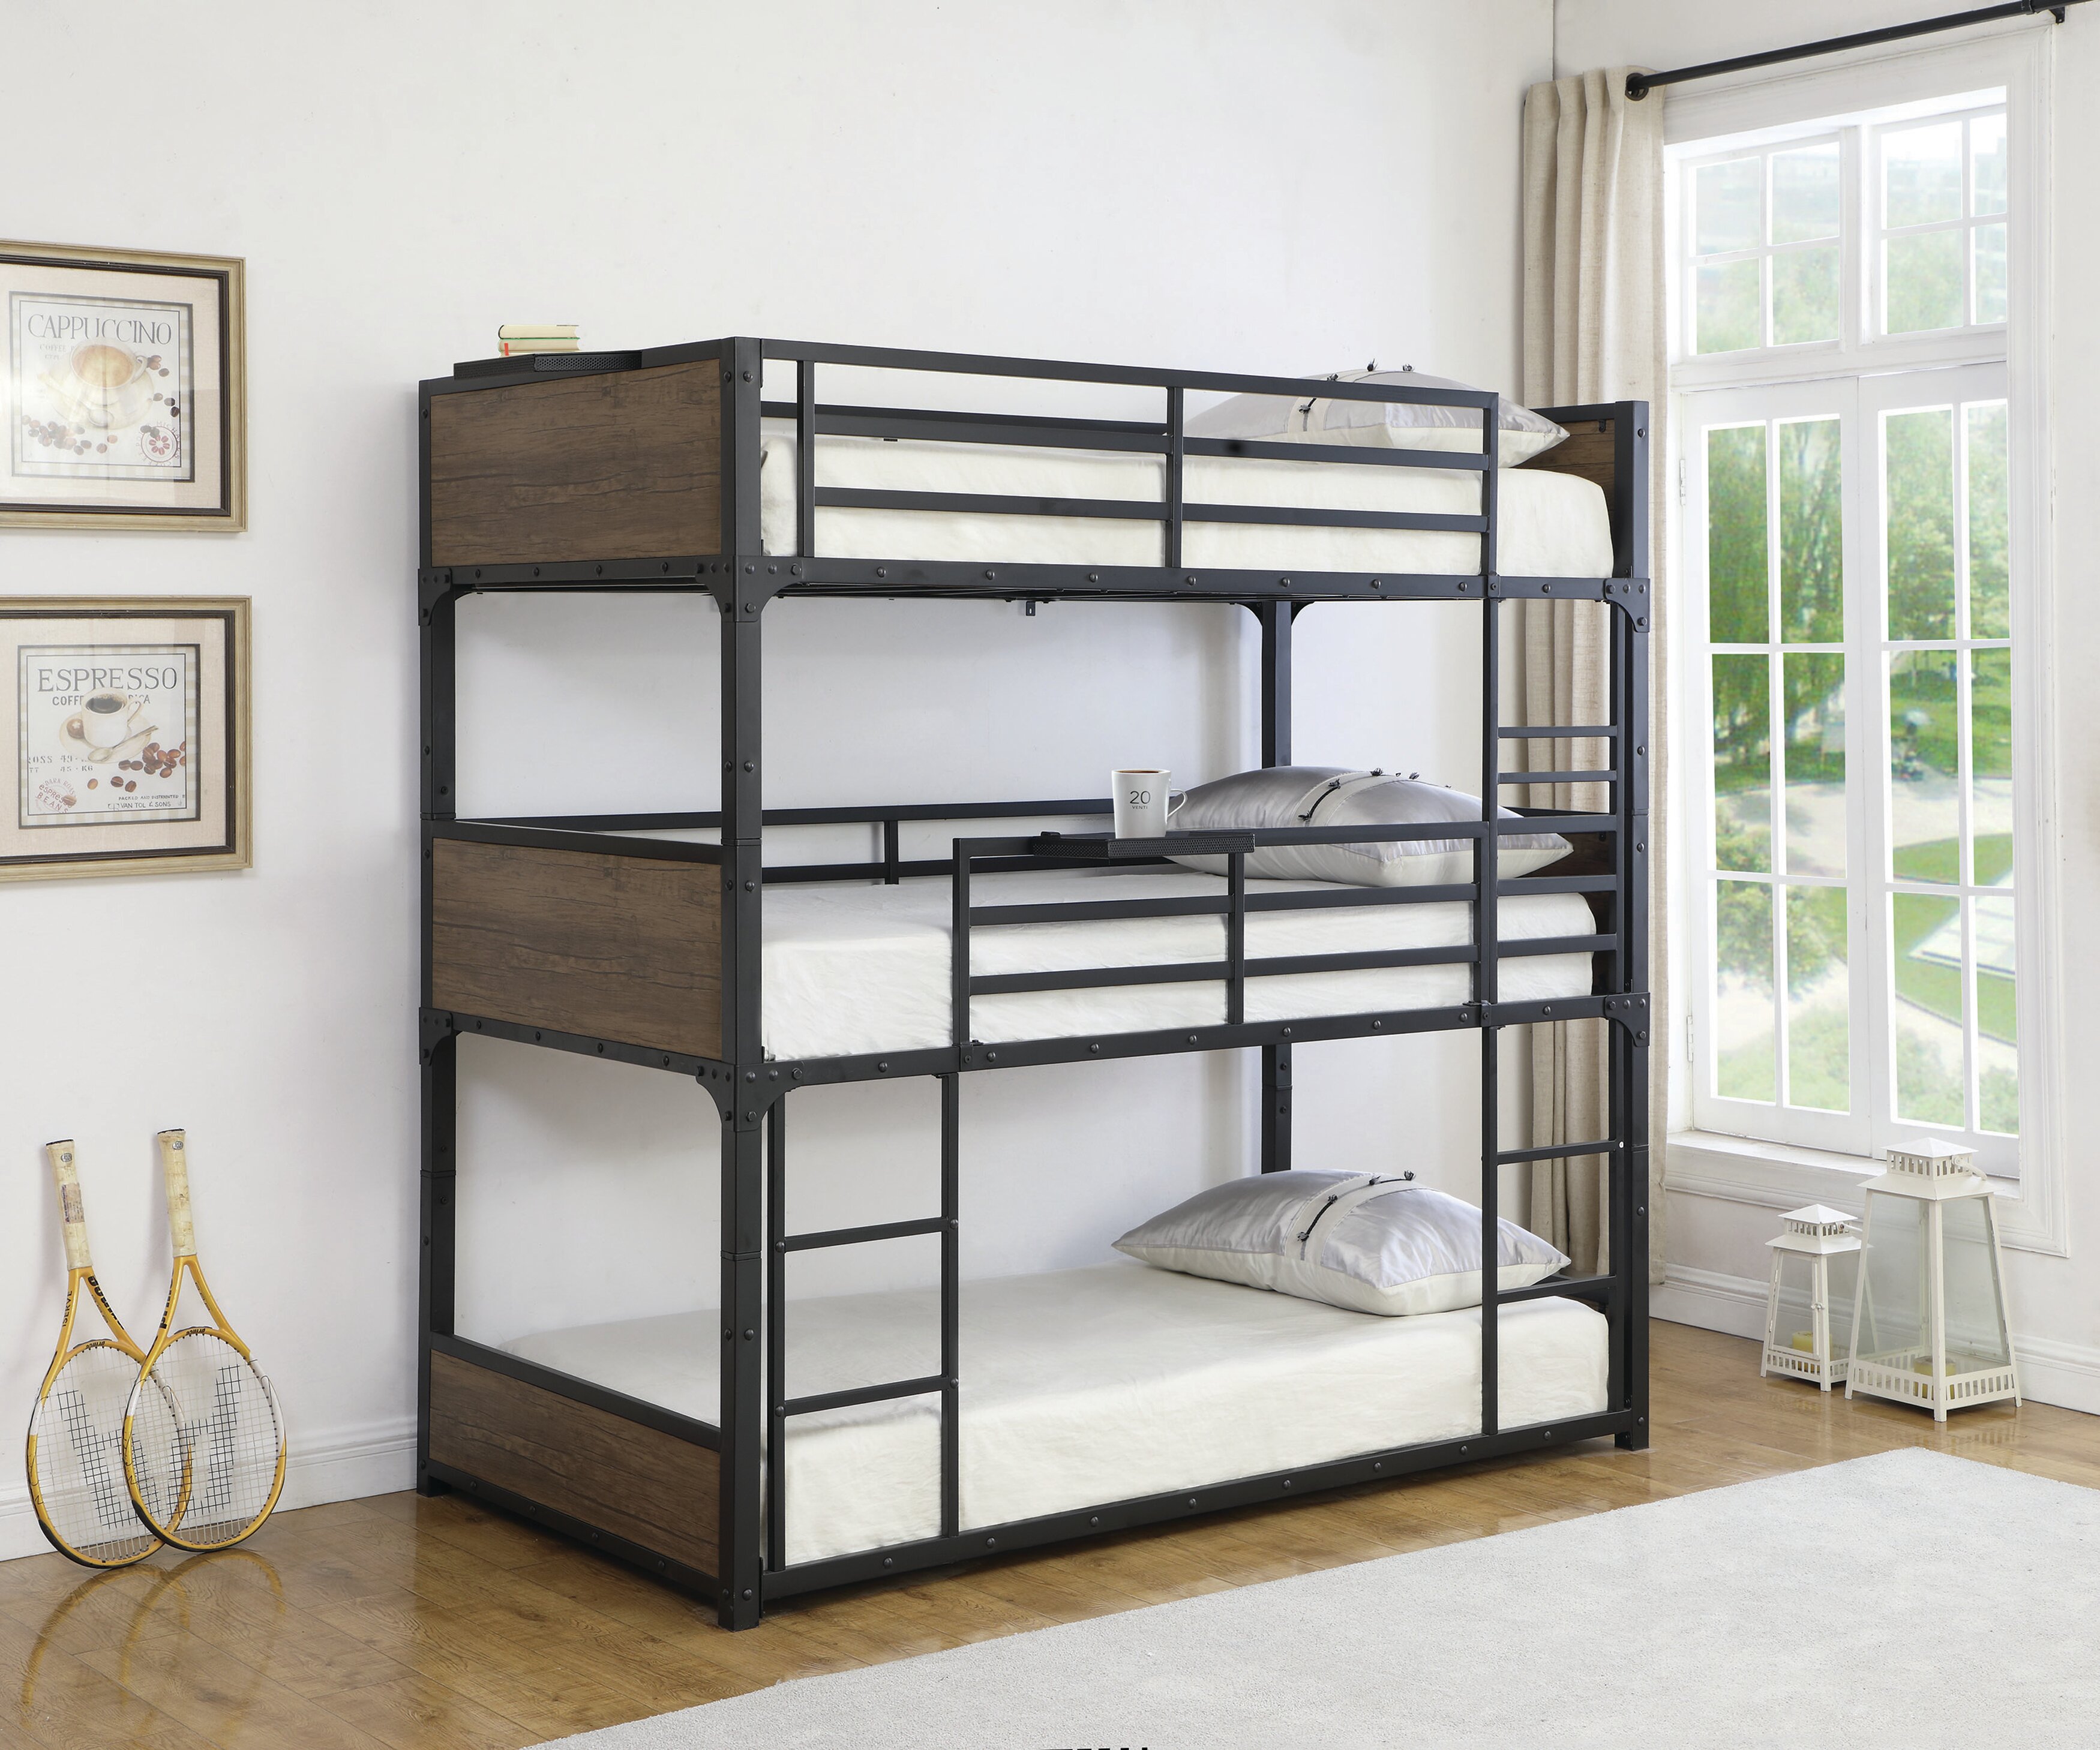 Image result for bunk bed 3 beds